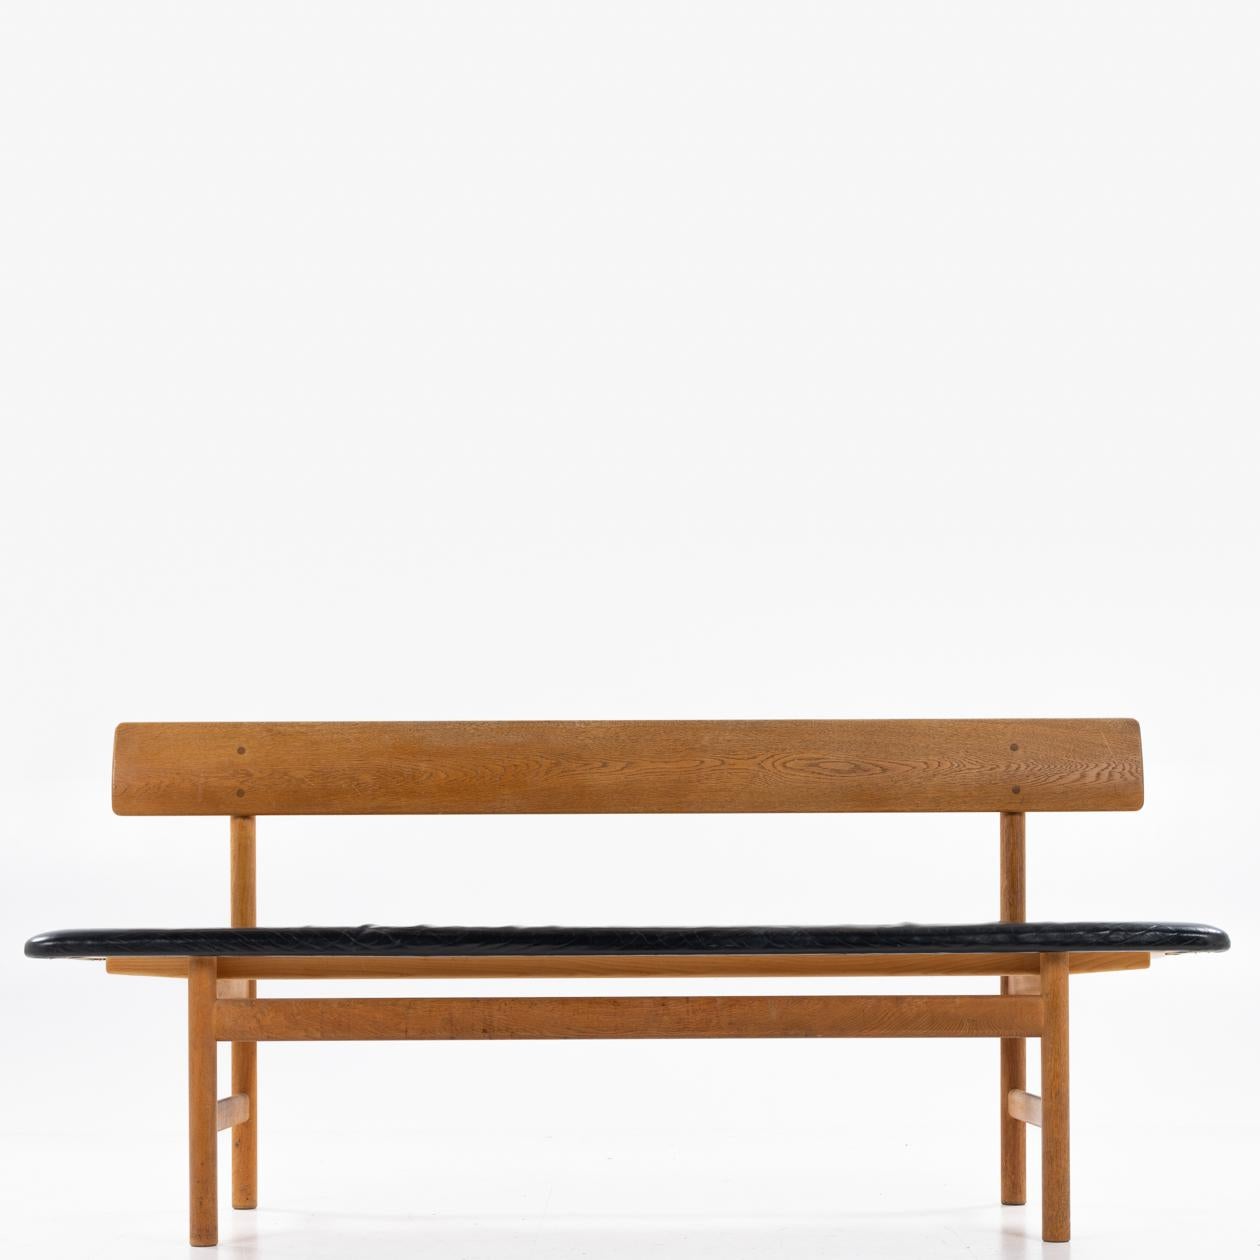 Leather BM 3171 bench in oak with patinated leather by Børge Mogensen For Sale